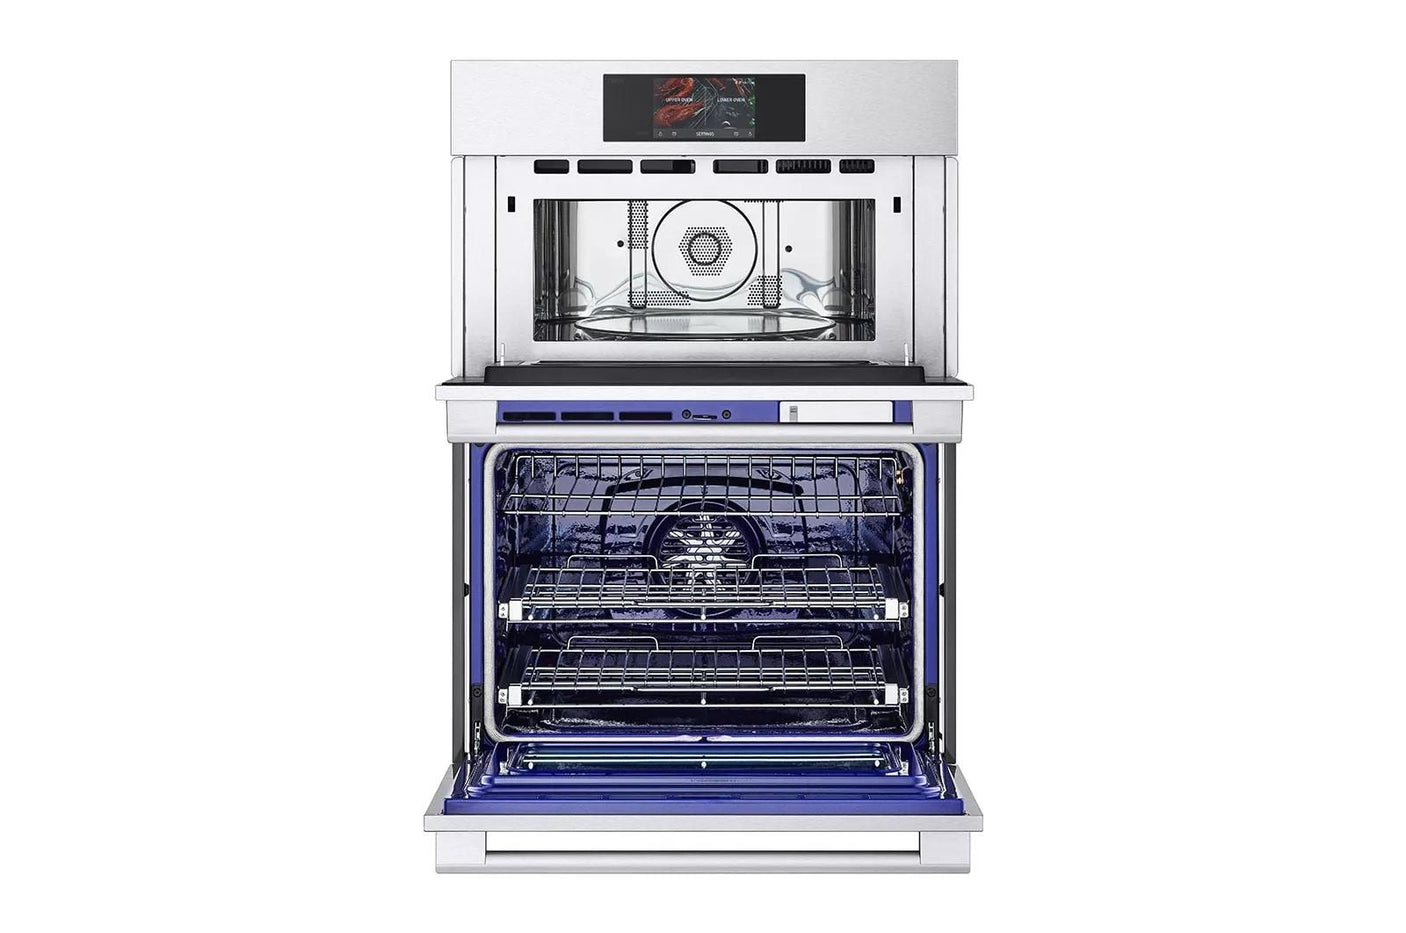 LG STUDIO 1.7/4.7 cu. ft. Combination Double Wall Oven with Air Fry